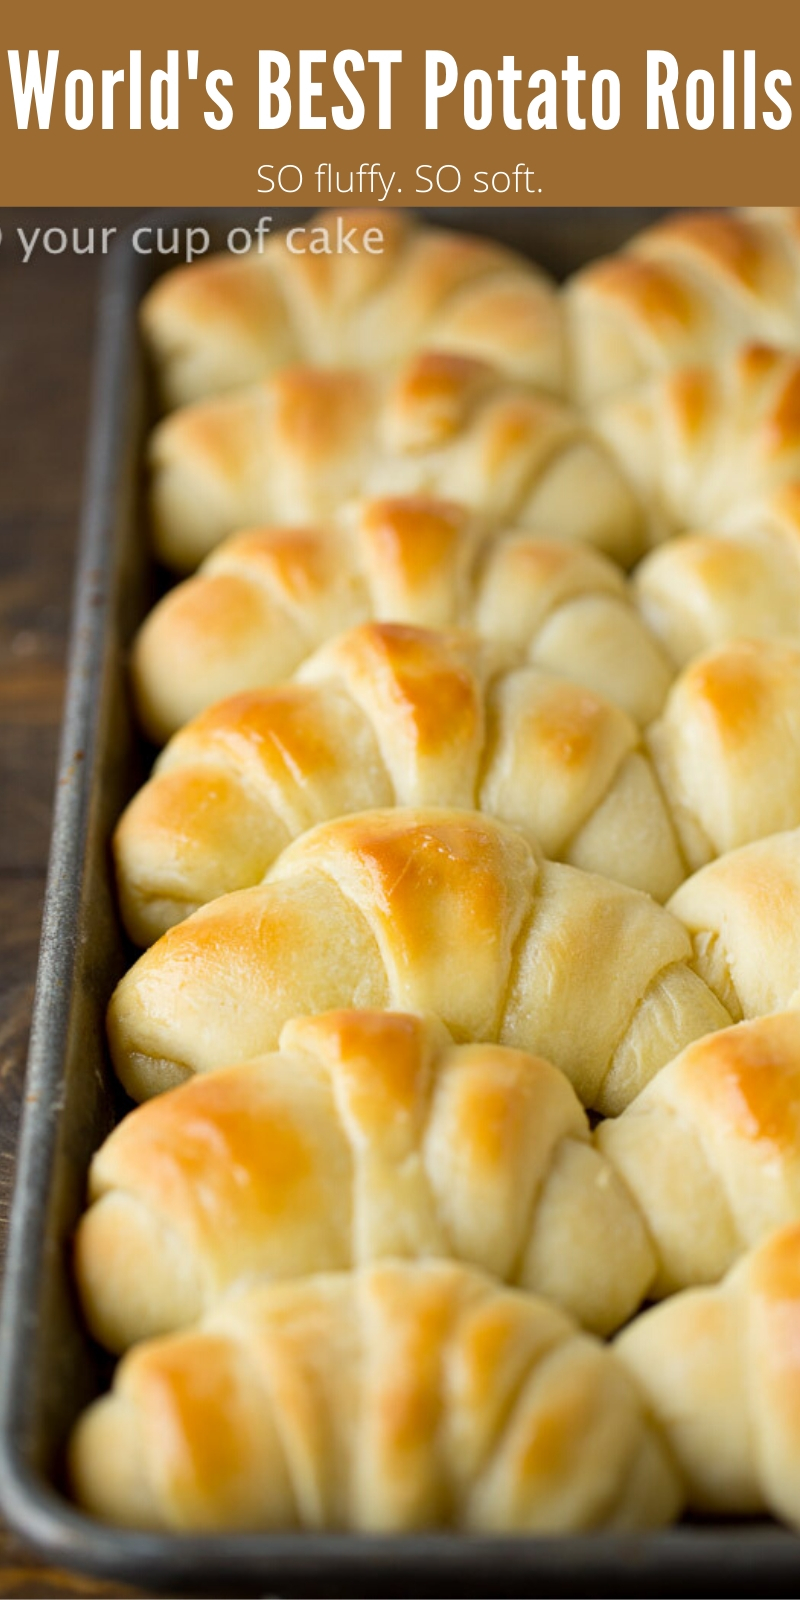 These rolls are AMAZING! Potato rolls are the best rolls made from scratch and no matter how many I make, we always run out before dinner is done! 